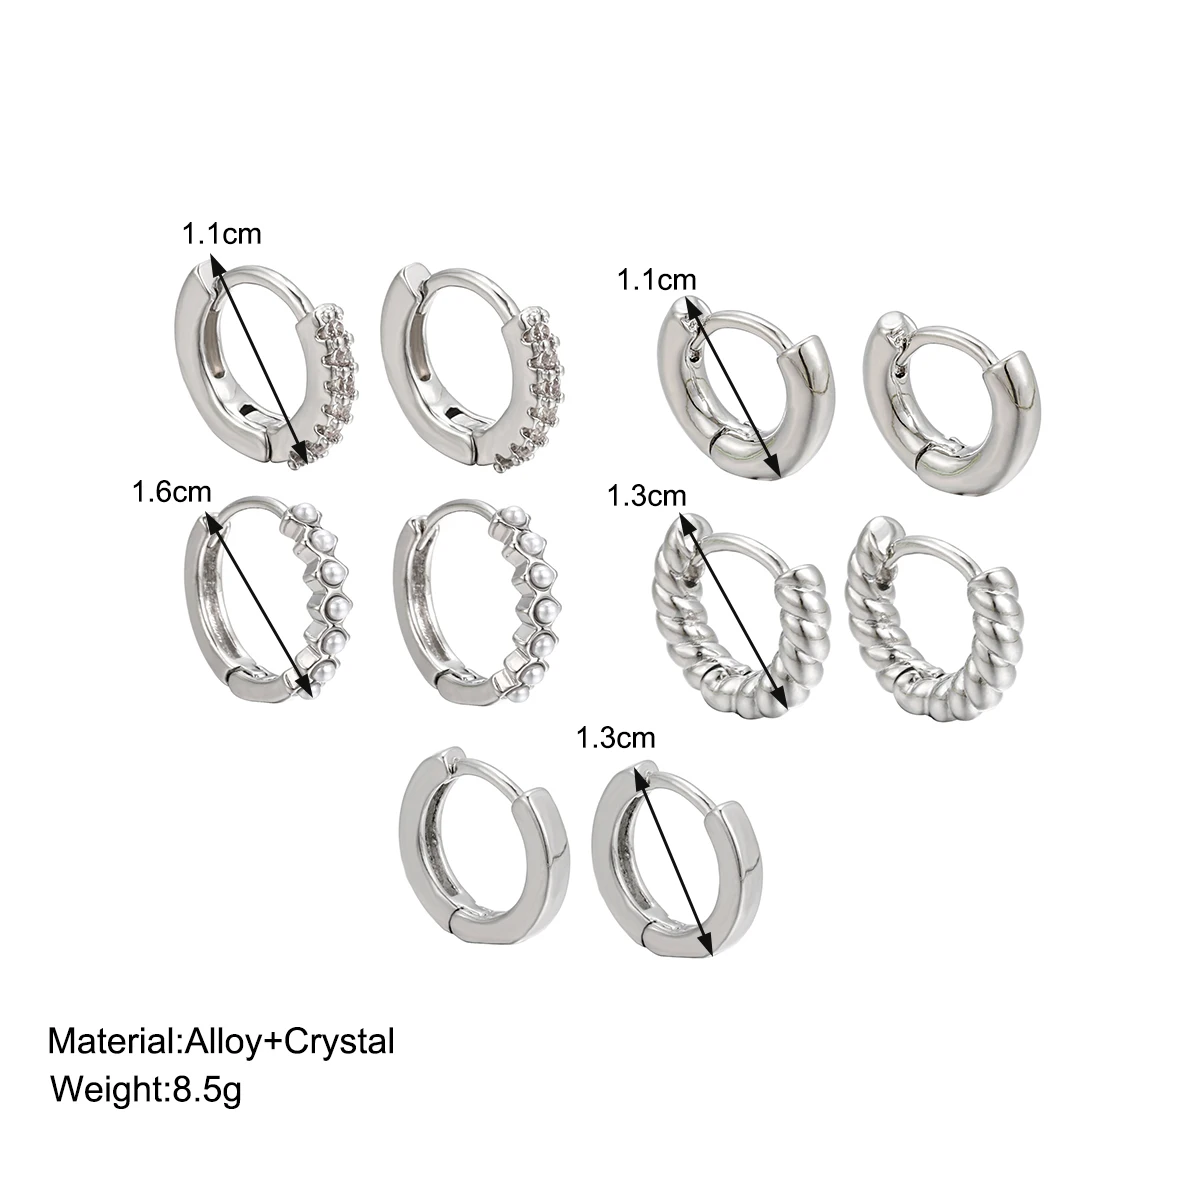 17KM Silver Color Small Circle Hoop Earrings for Women Girls New Fashion Vintage Personality Dangle Earring Set Jewelry Party